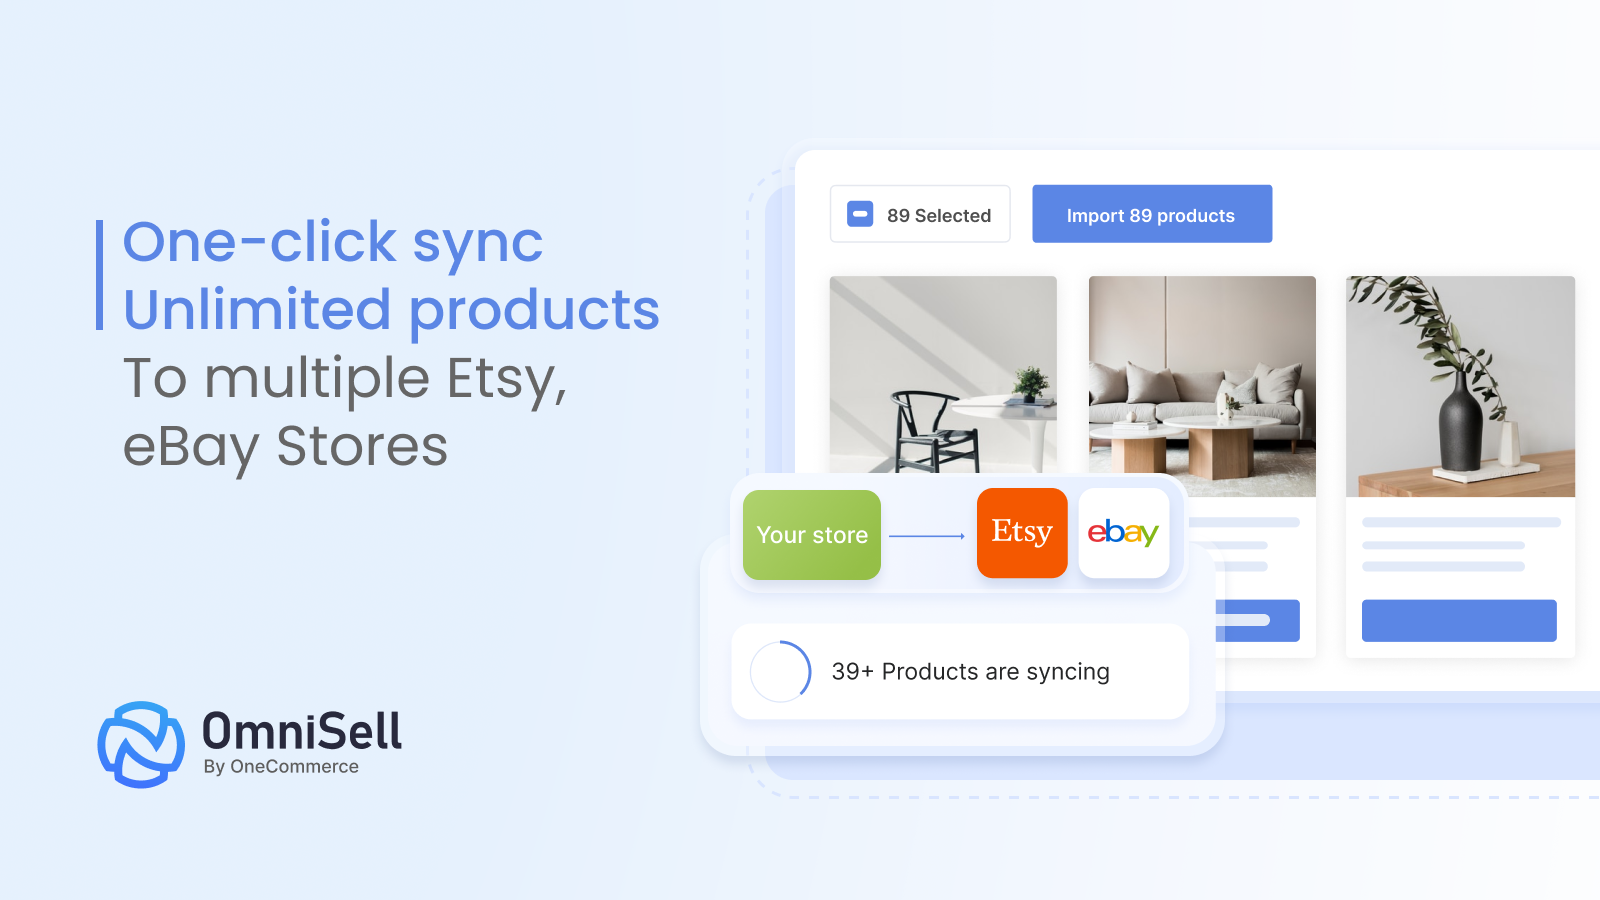 One-click sync unlimited products to multiple Etsy, eBay stores